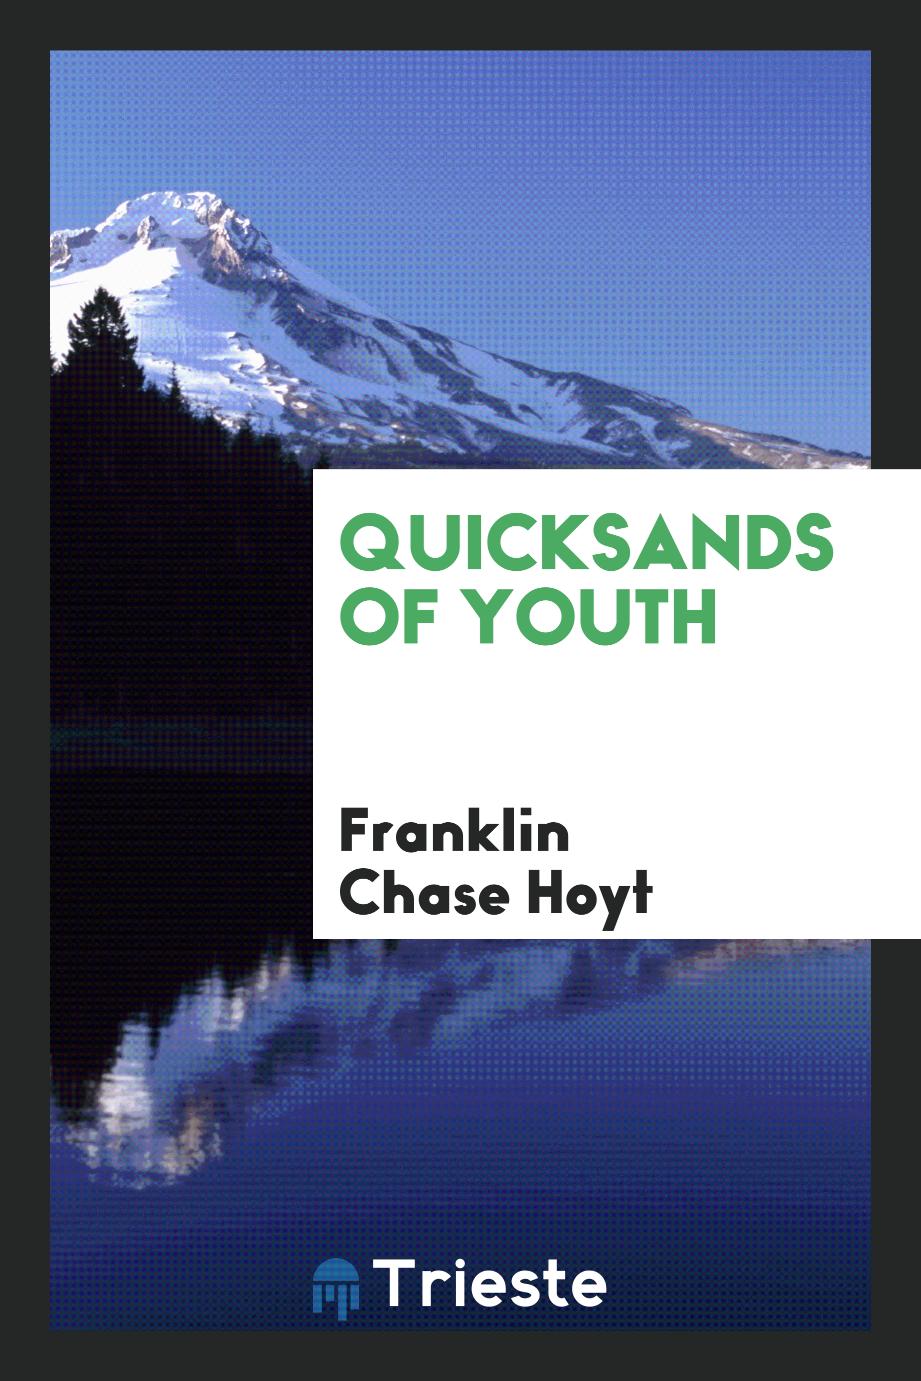 Quicksands of youth